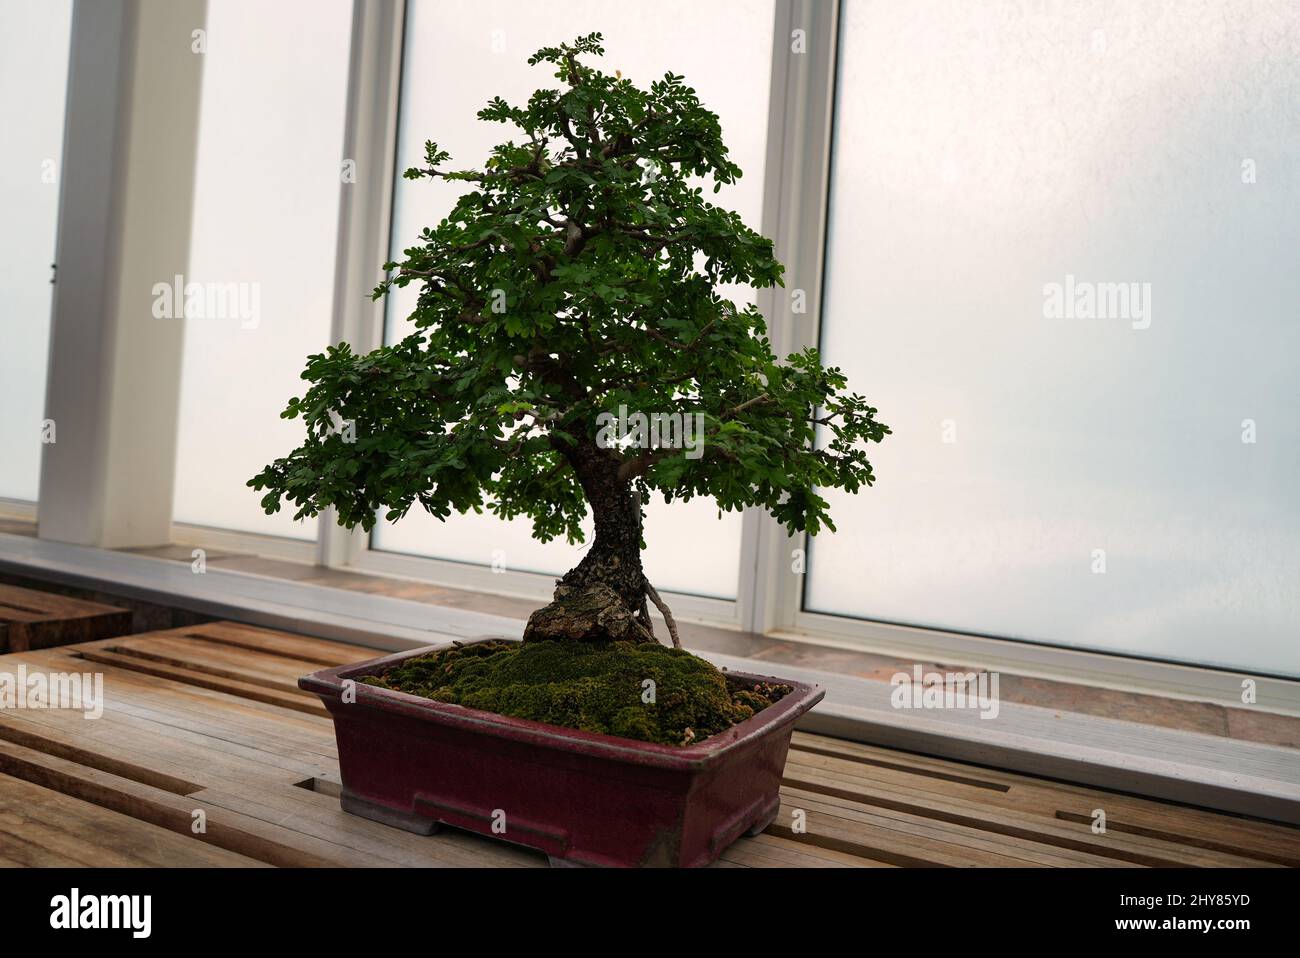 Bonsai tree growing in a marble pot on a wooden table by the window in bright light Stock Photo